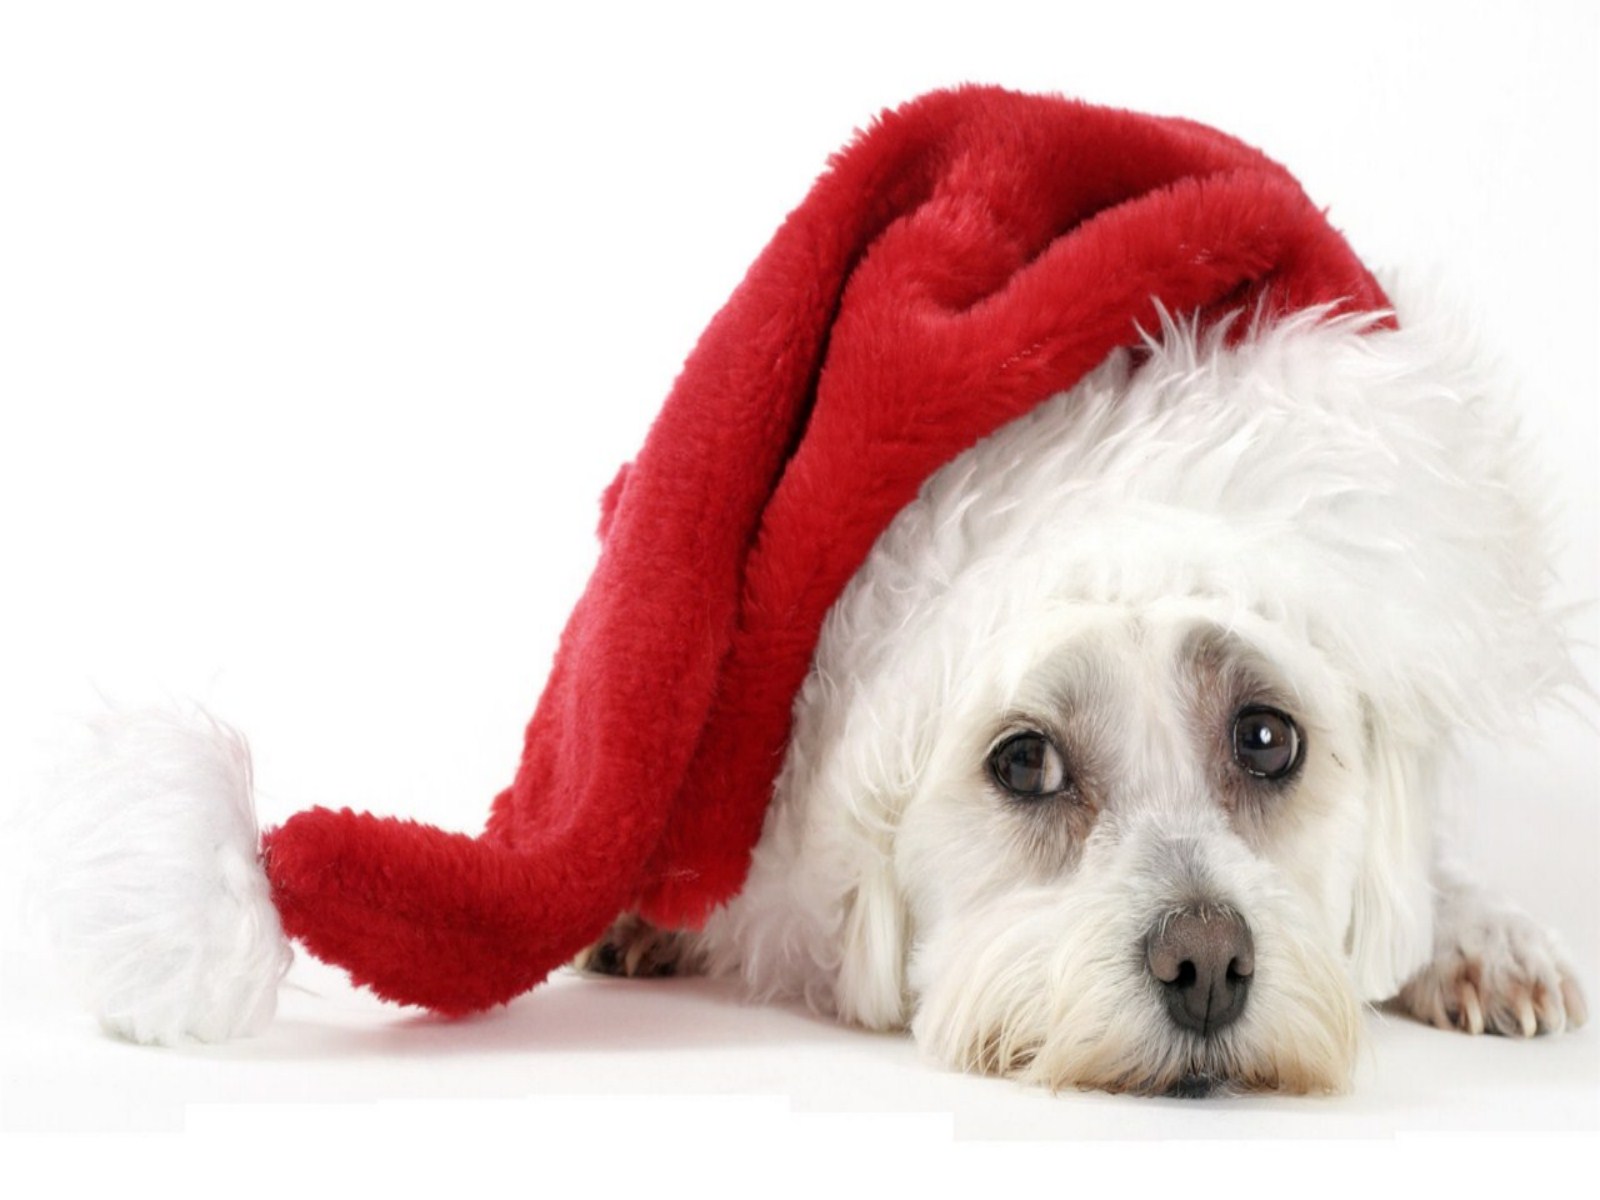 Christmas Puppy Wallpaper Image